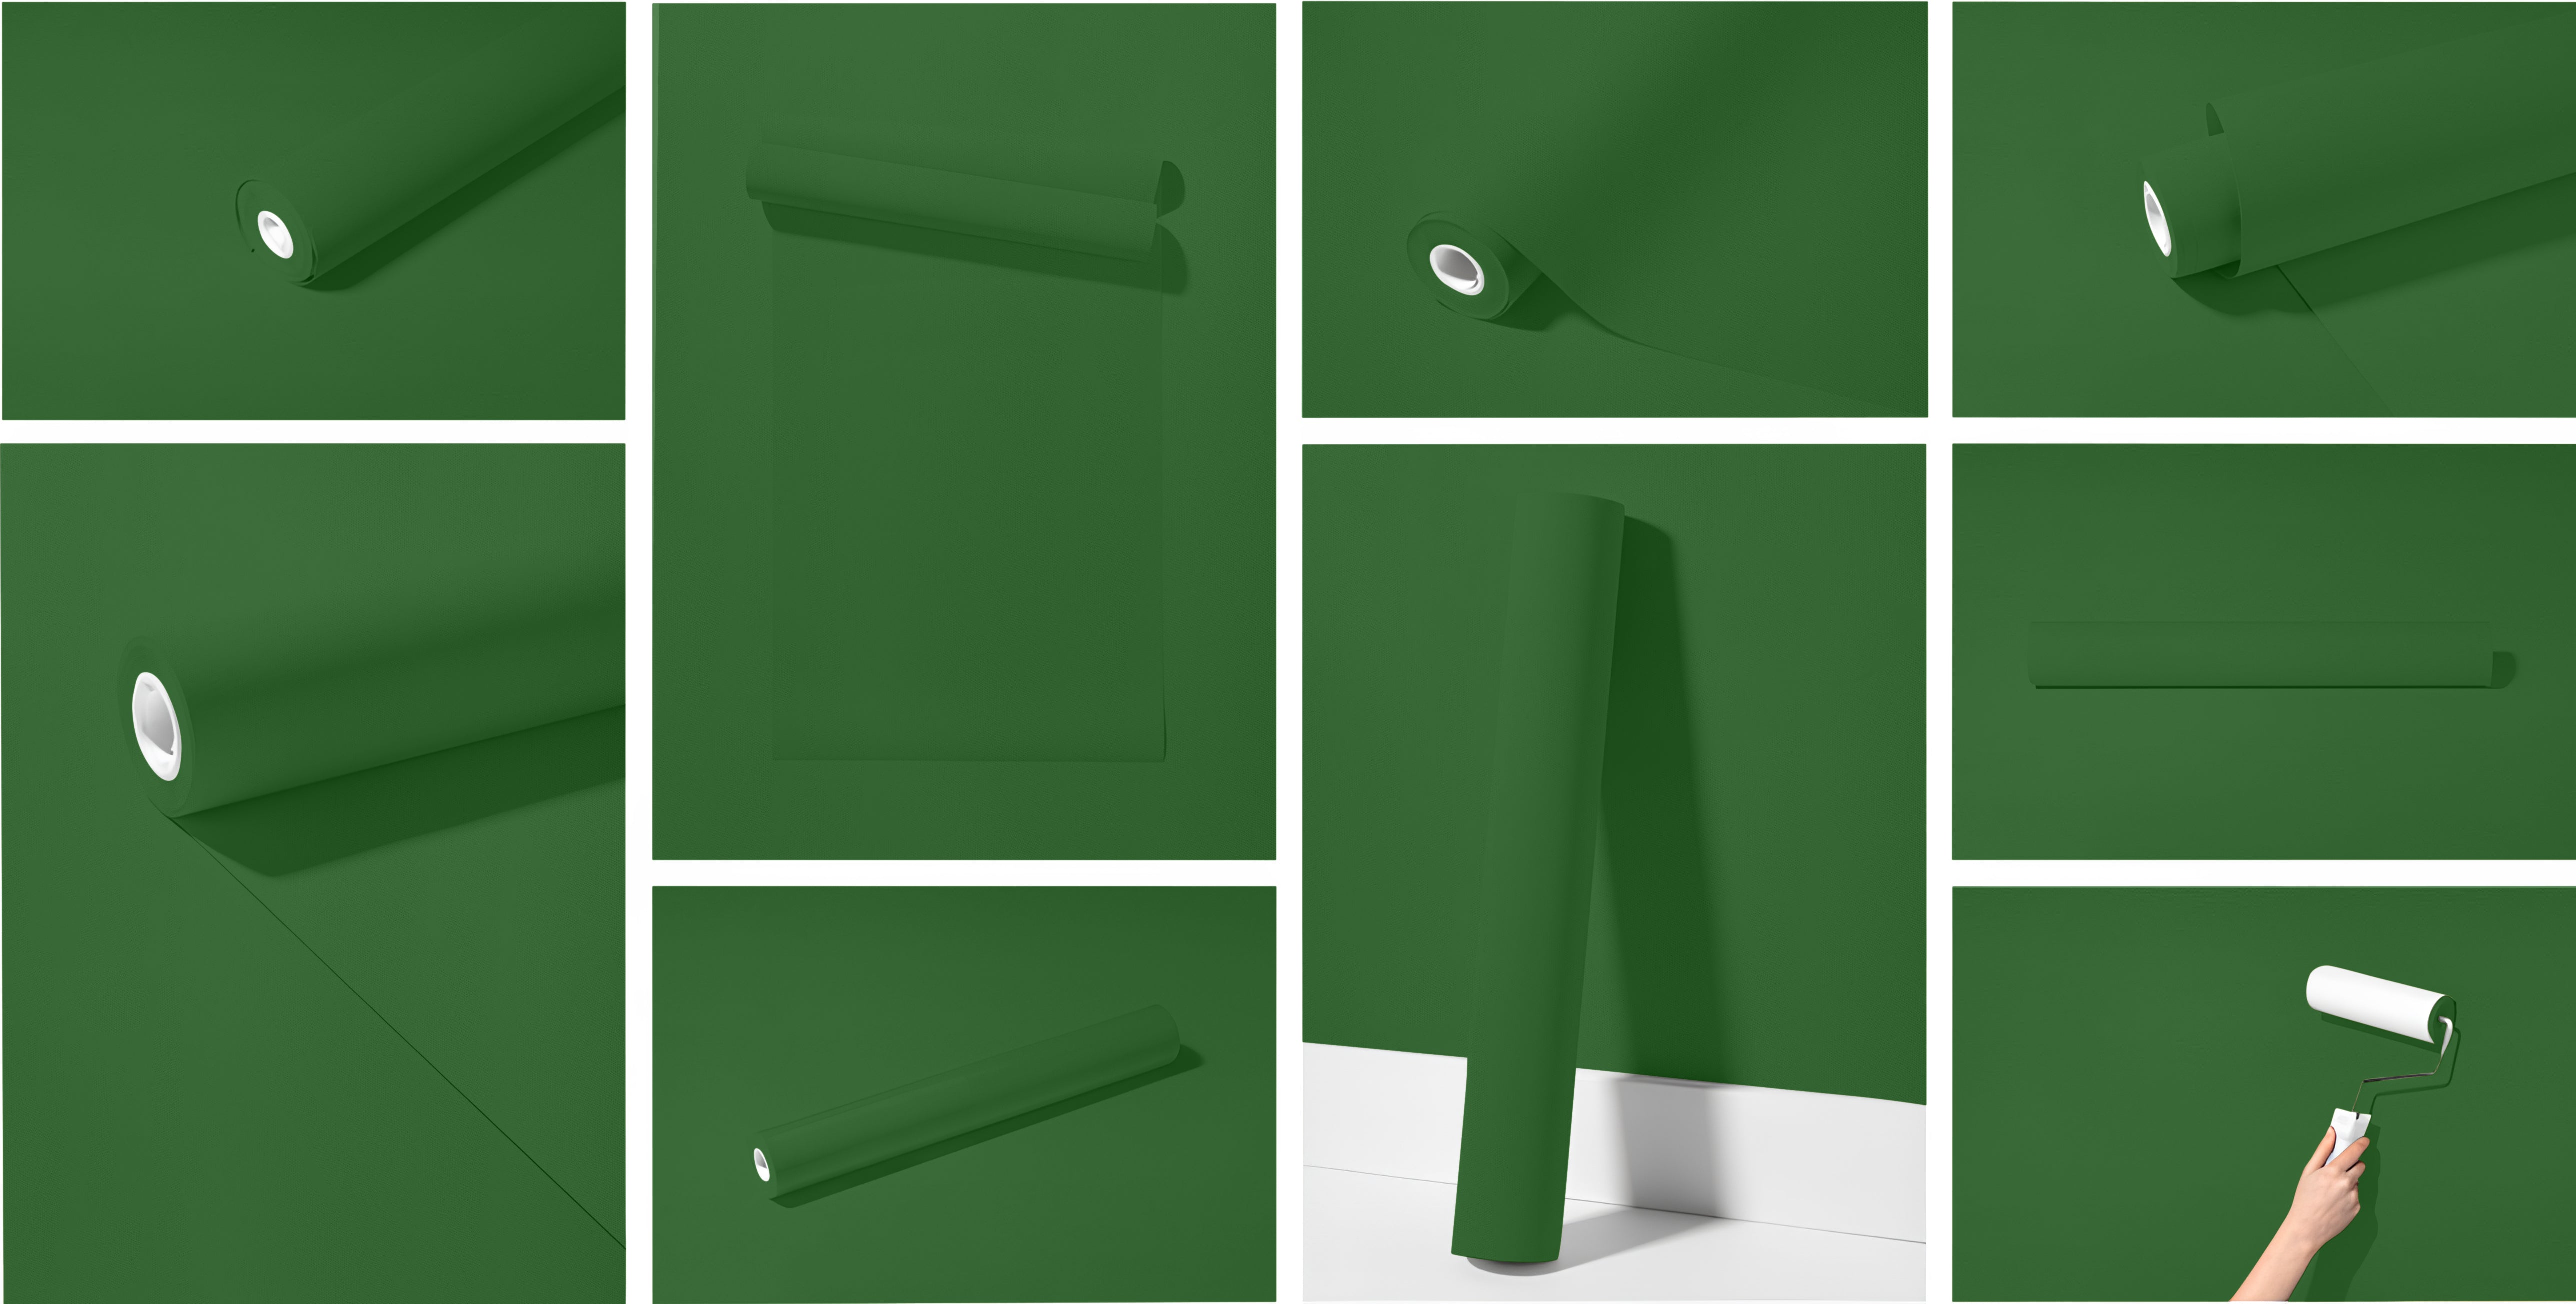 Peel & Stick Removable Re-usable Paint - Color RAL 6001 Emerald Green - offRAL™ - RALRAW LLC, USA